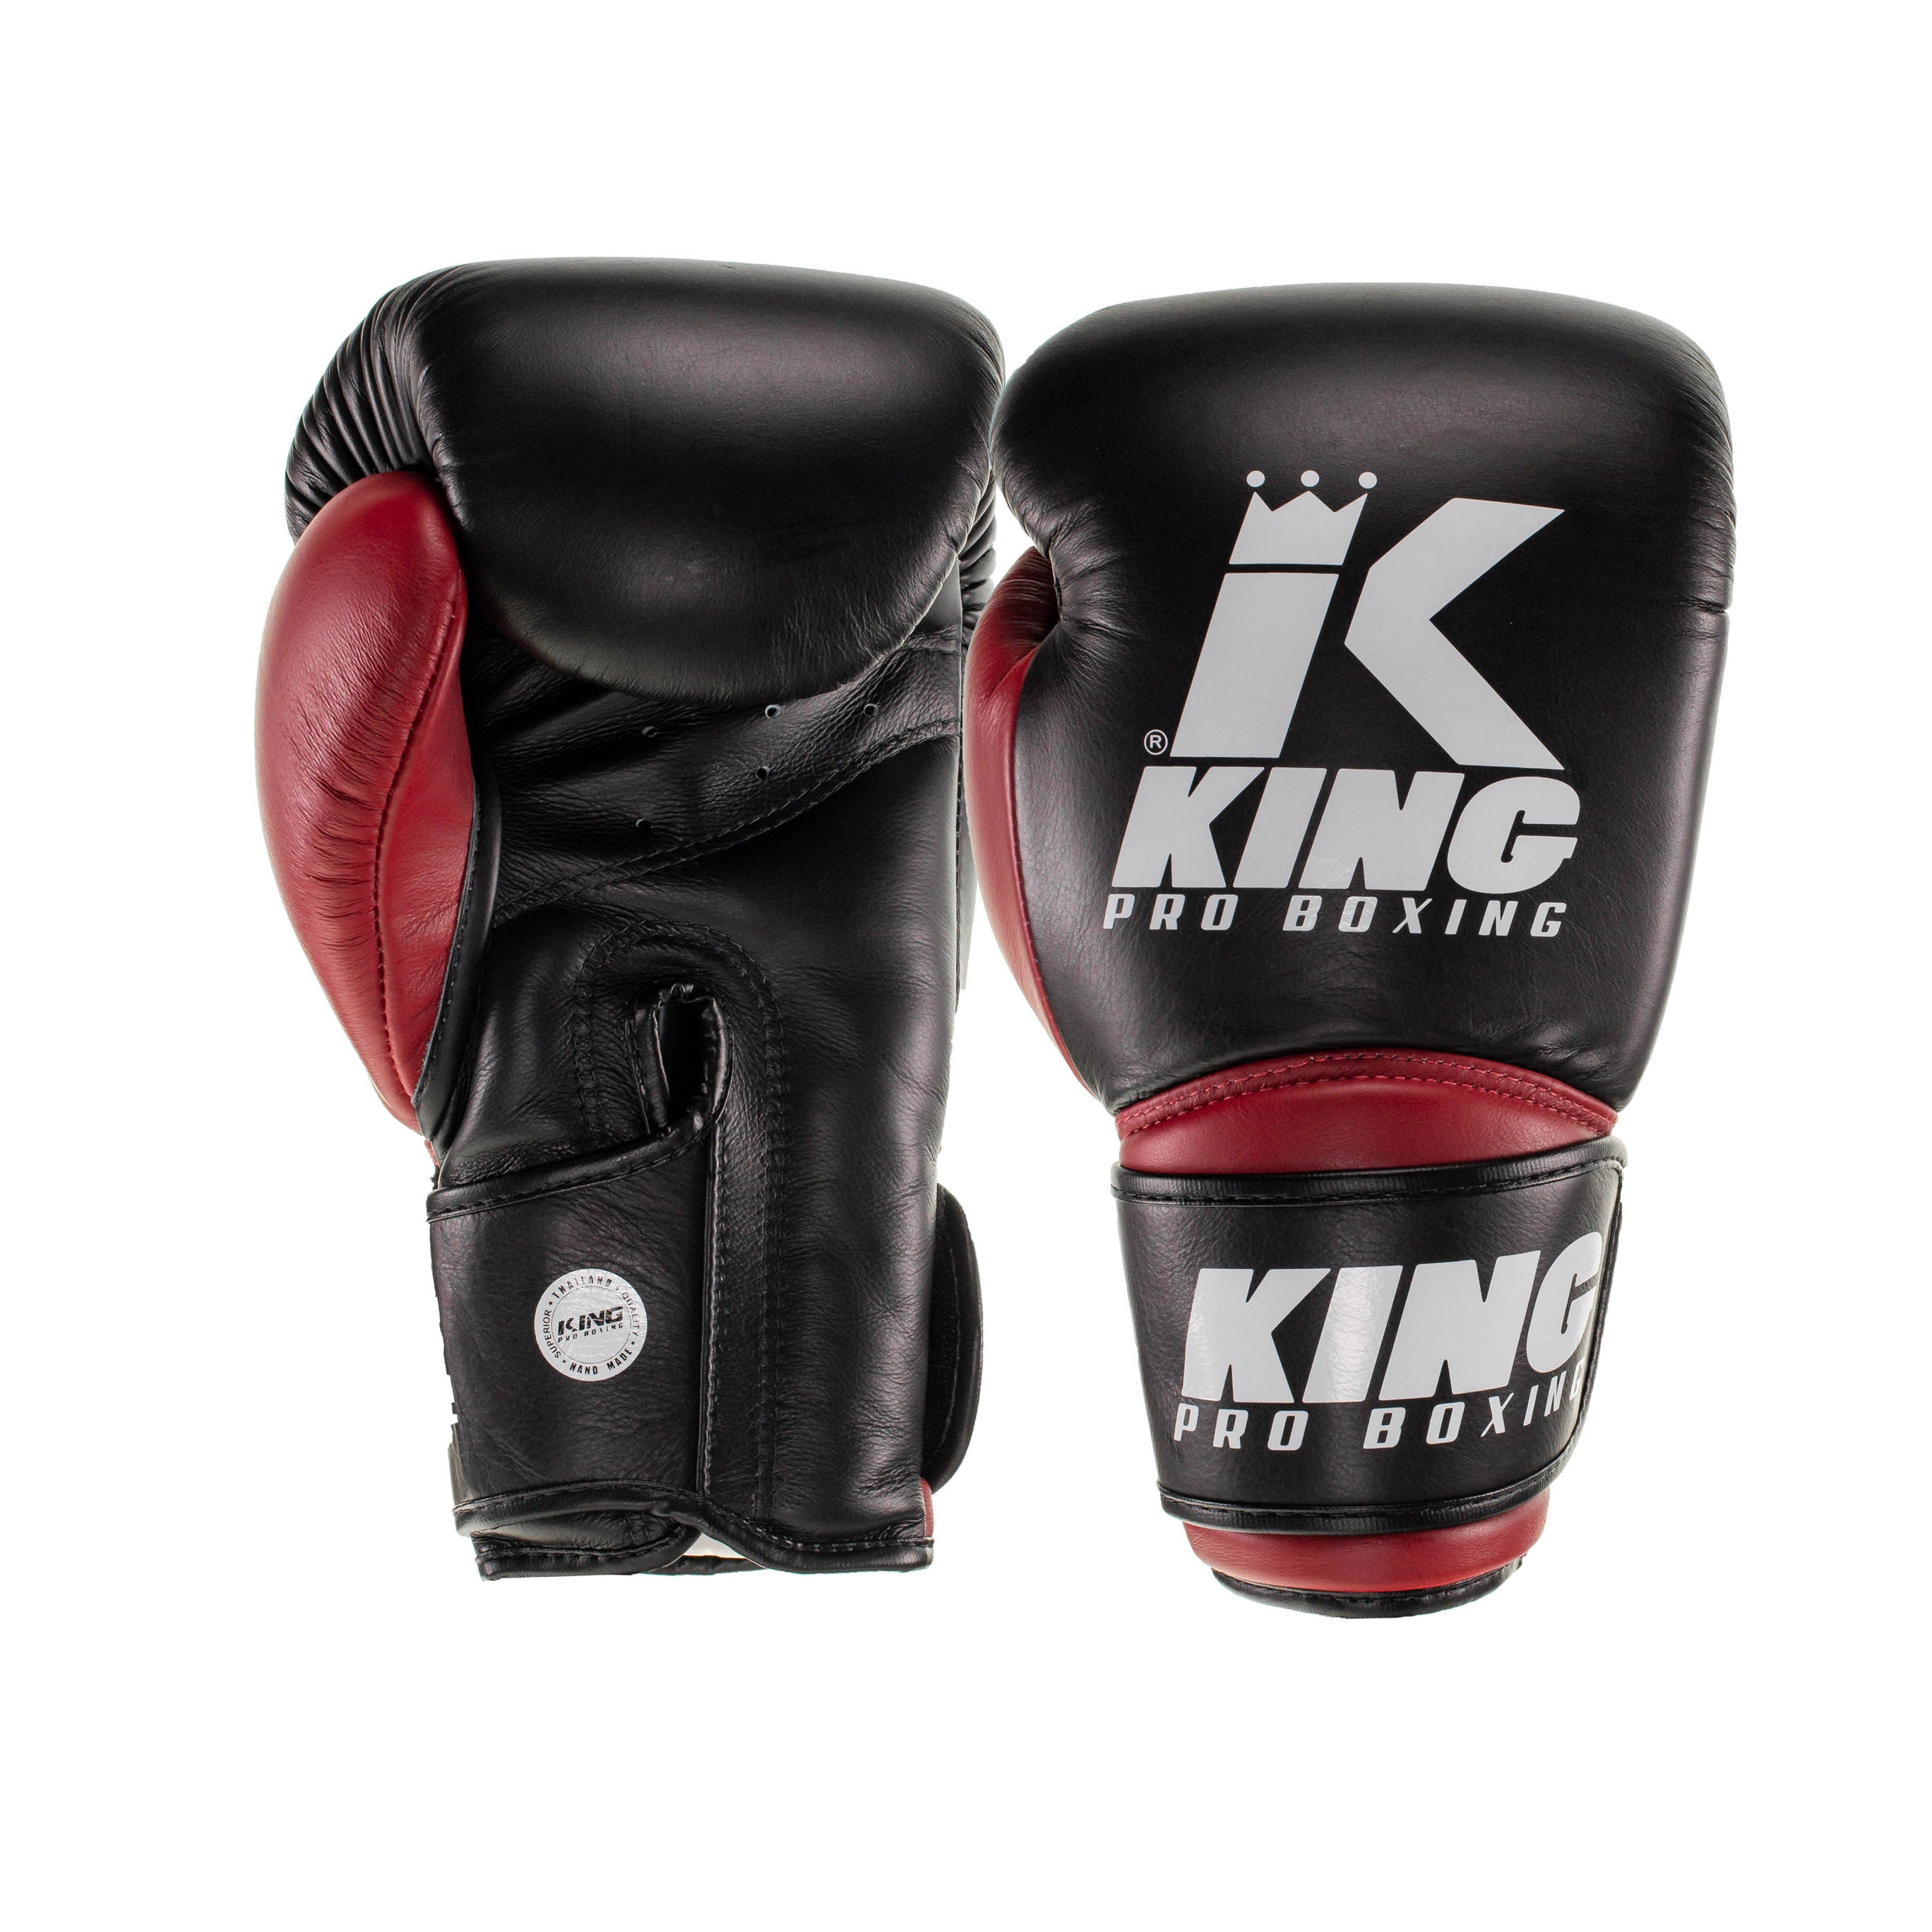 King PRO boxing boxing gloves - STAR 10